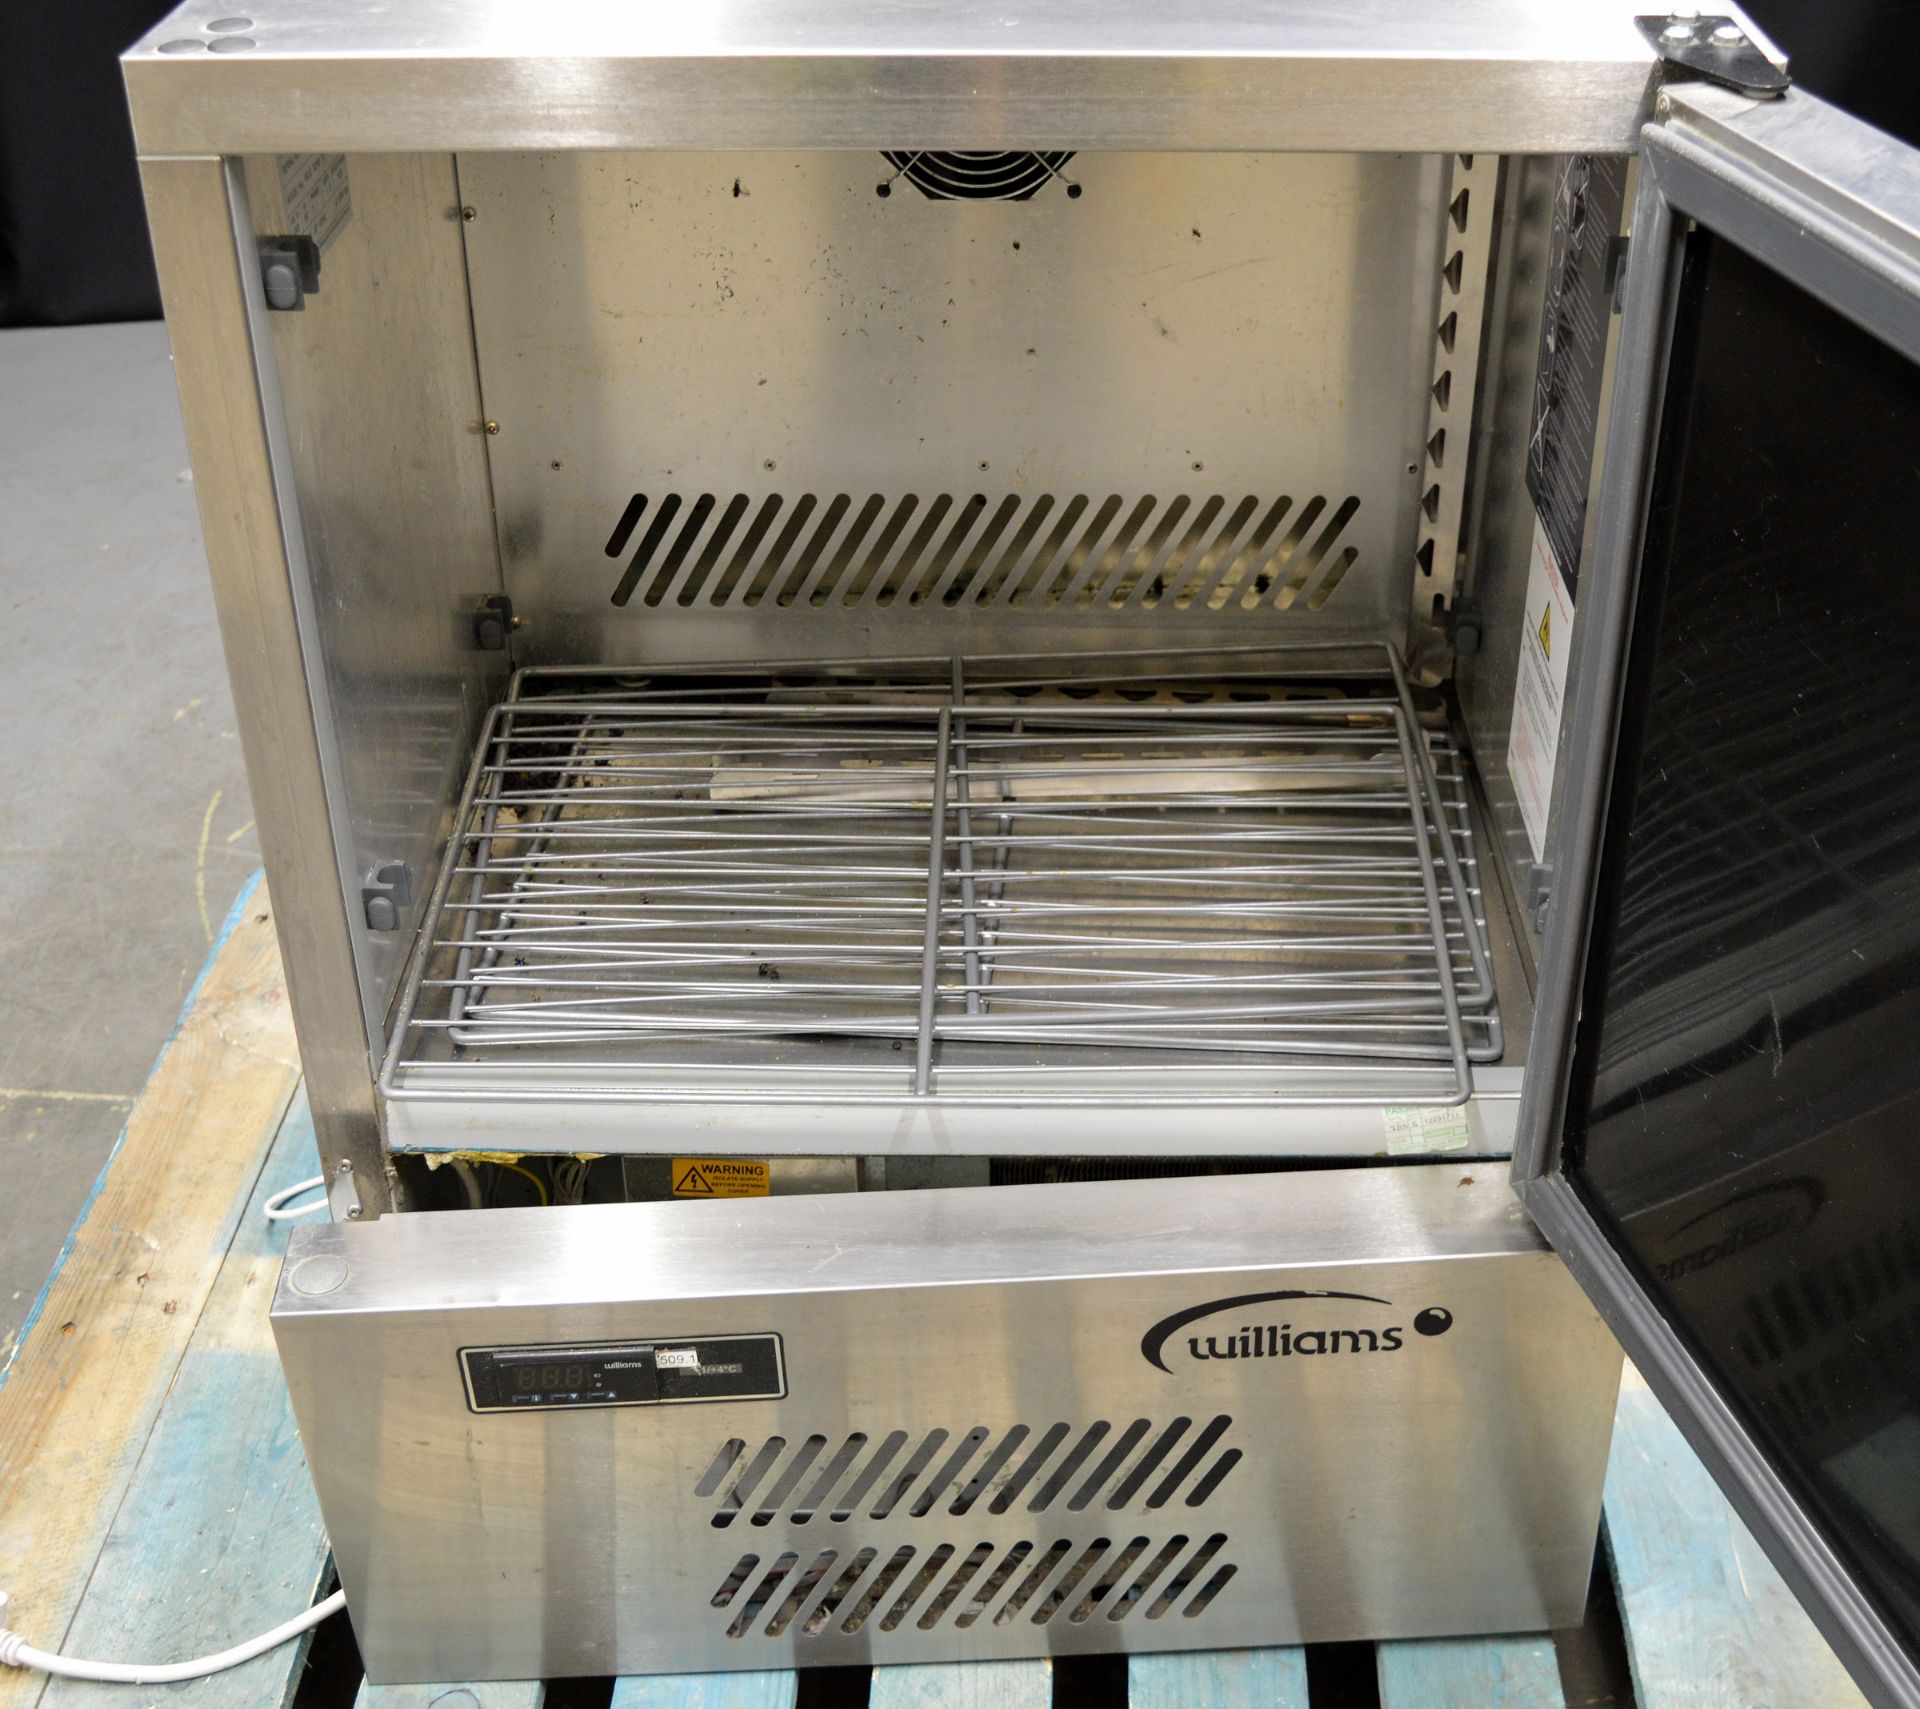 Williams H5UC R290 R1 Stainless Steel Undercounter Fridge, single phase electric - Image 4 of 8